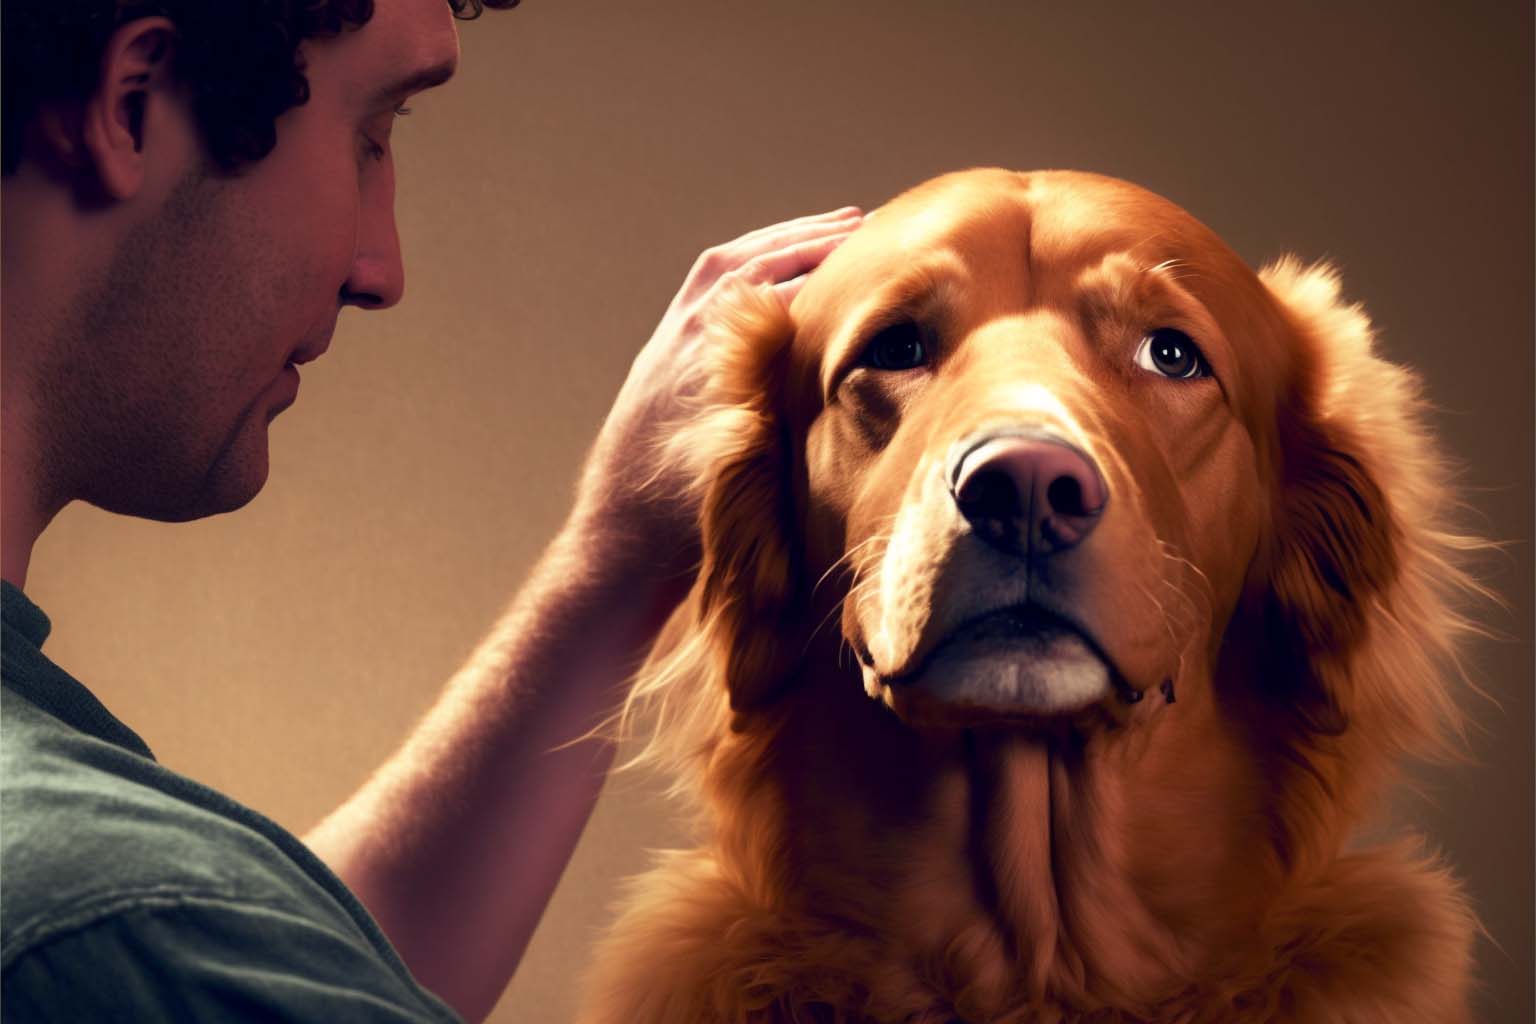 [VIDEO] What Everyone Ought to Know About Petting Dogs